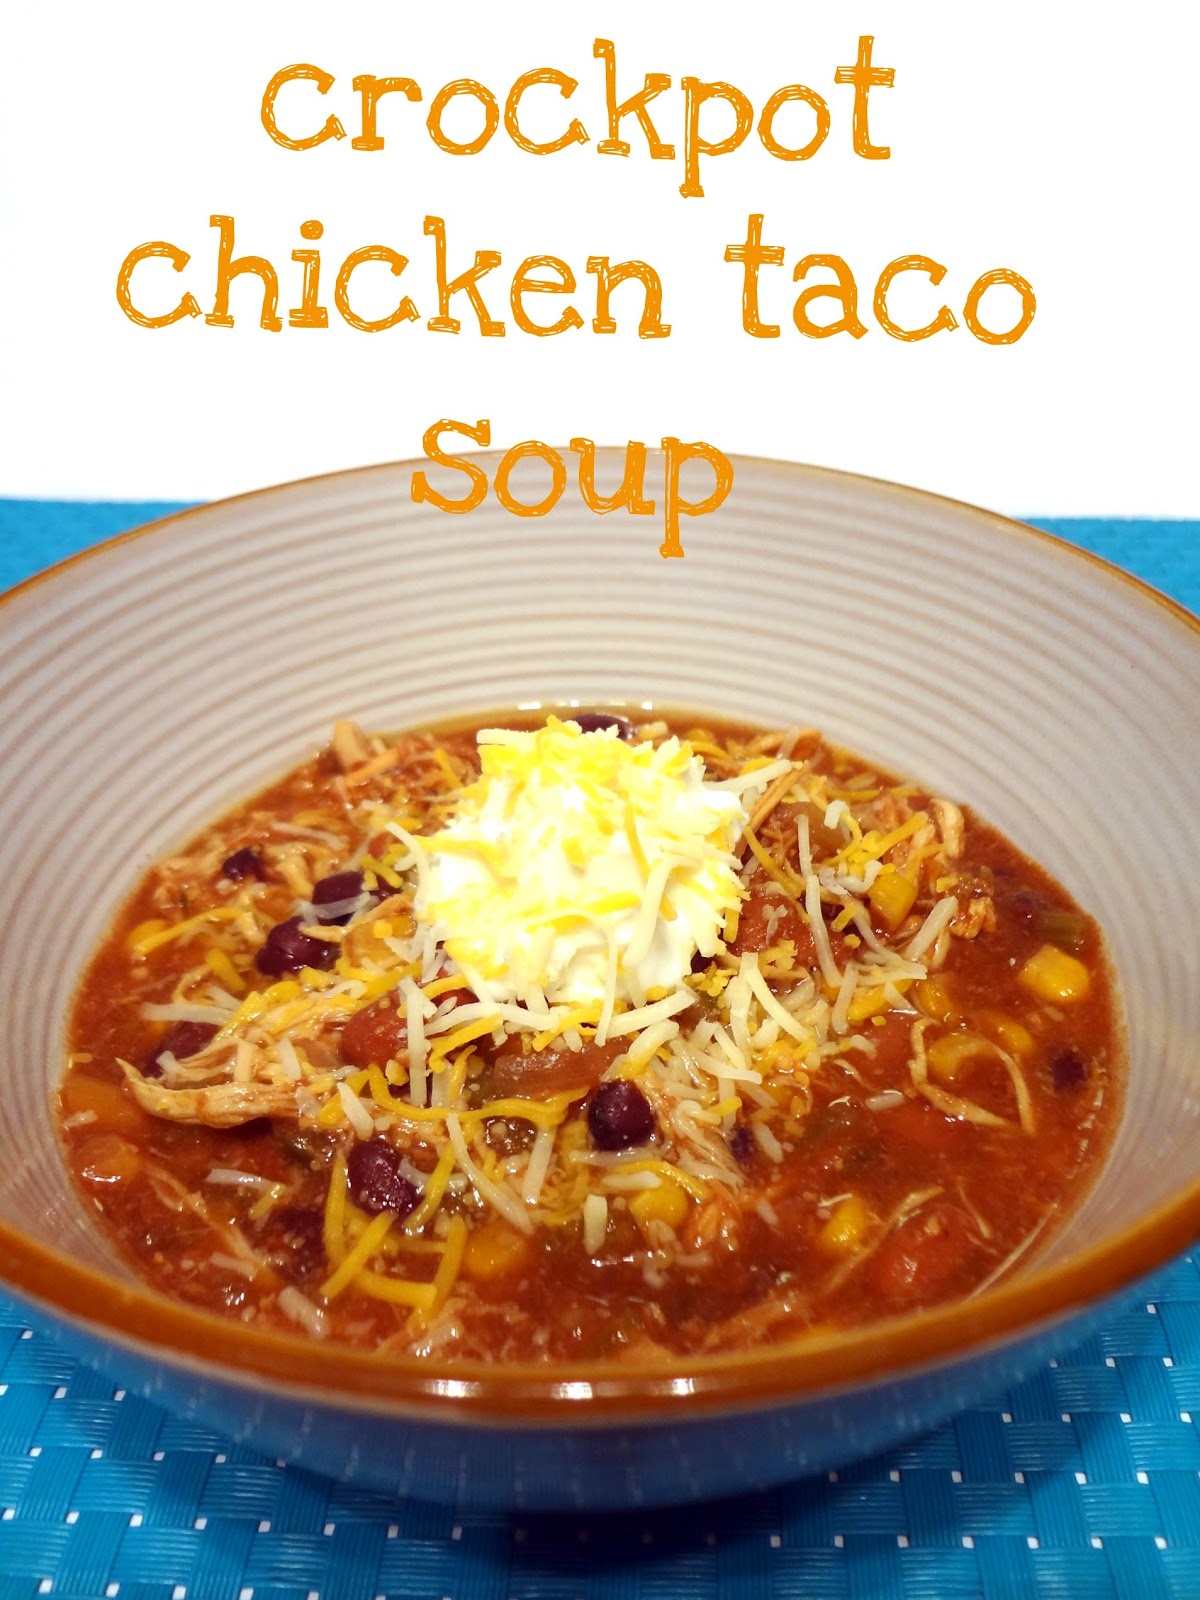 Attack of the Hungry Monster: Crockpot Chicken Taco Soup